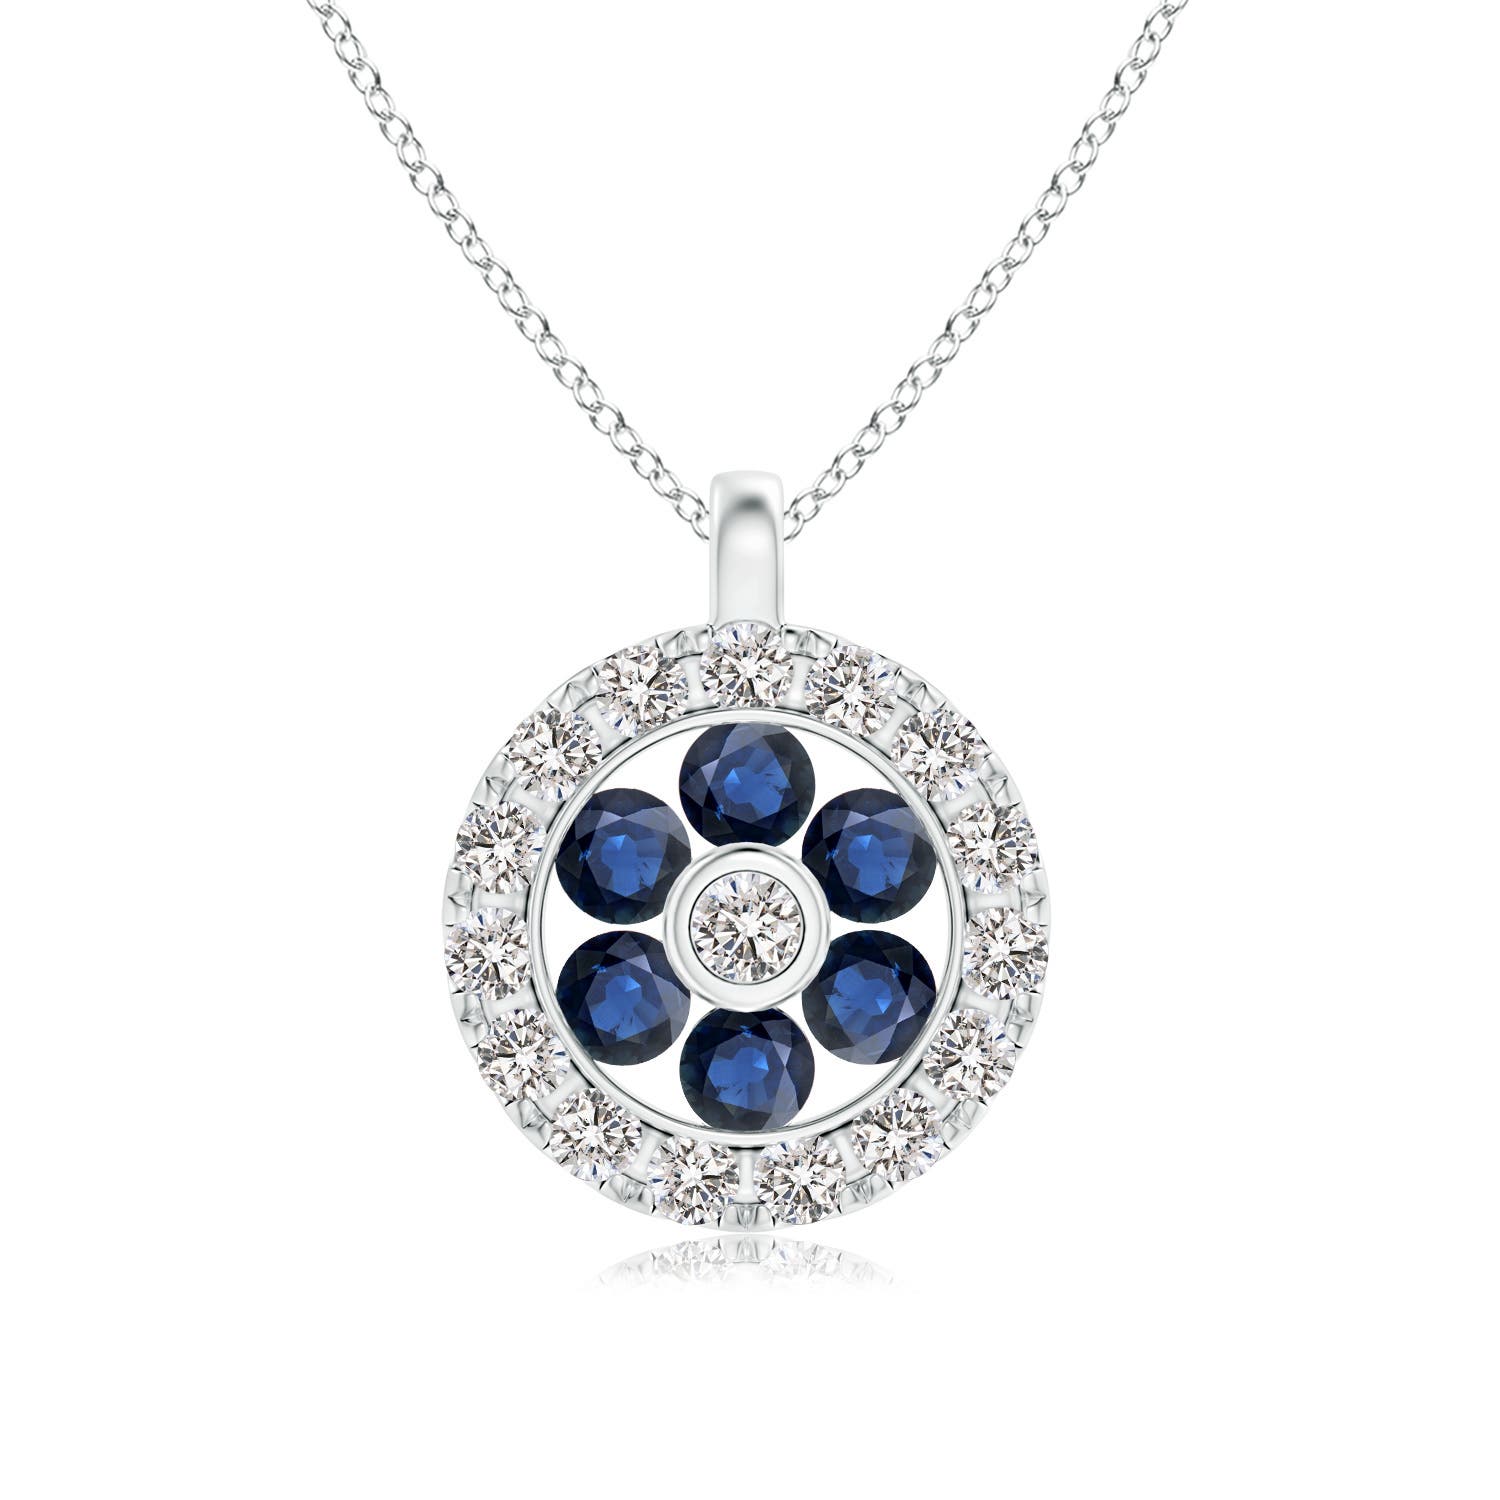 AA - Blue Sapphire / 0.21 CT / 14 KT White Gold